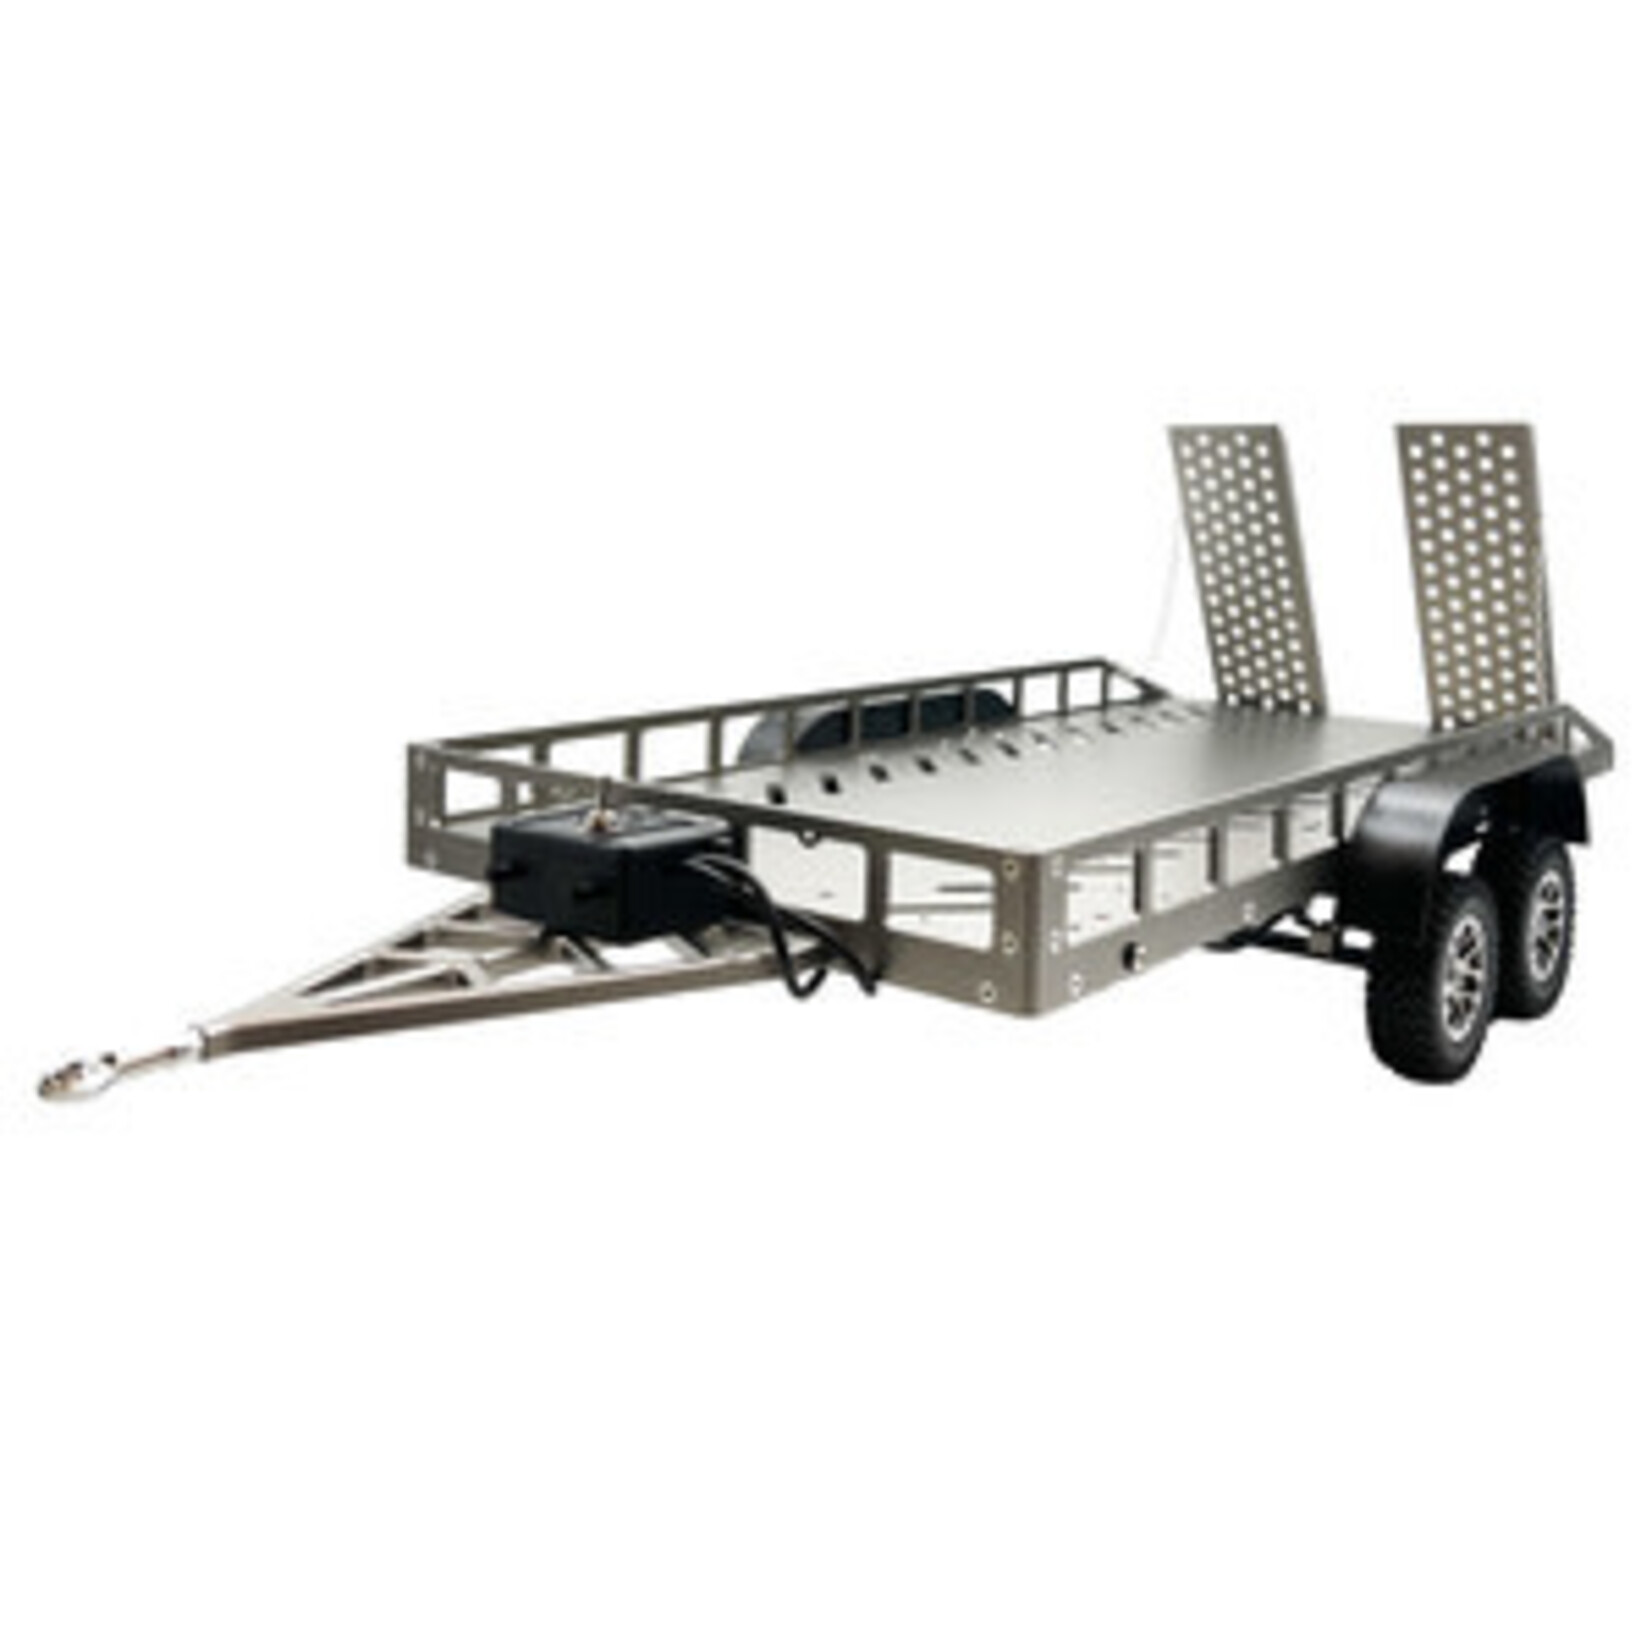 Bold RC 1/10 Scale Full Metal Trailer with LED Lights (Titanium)